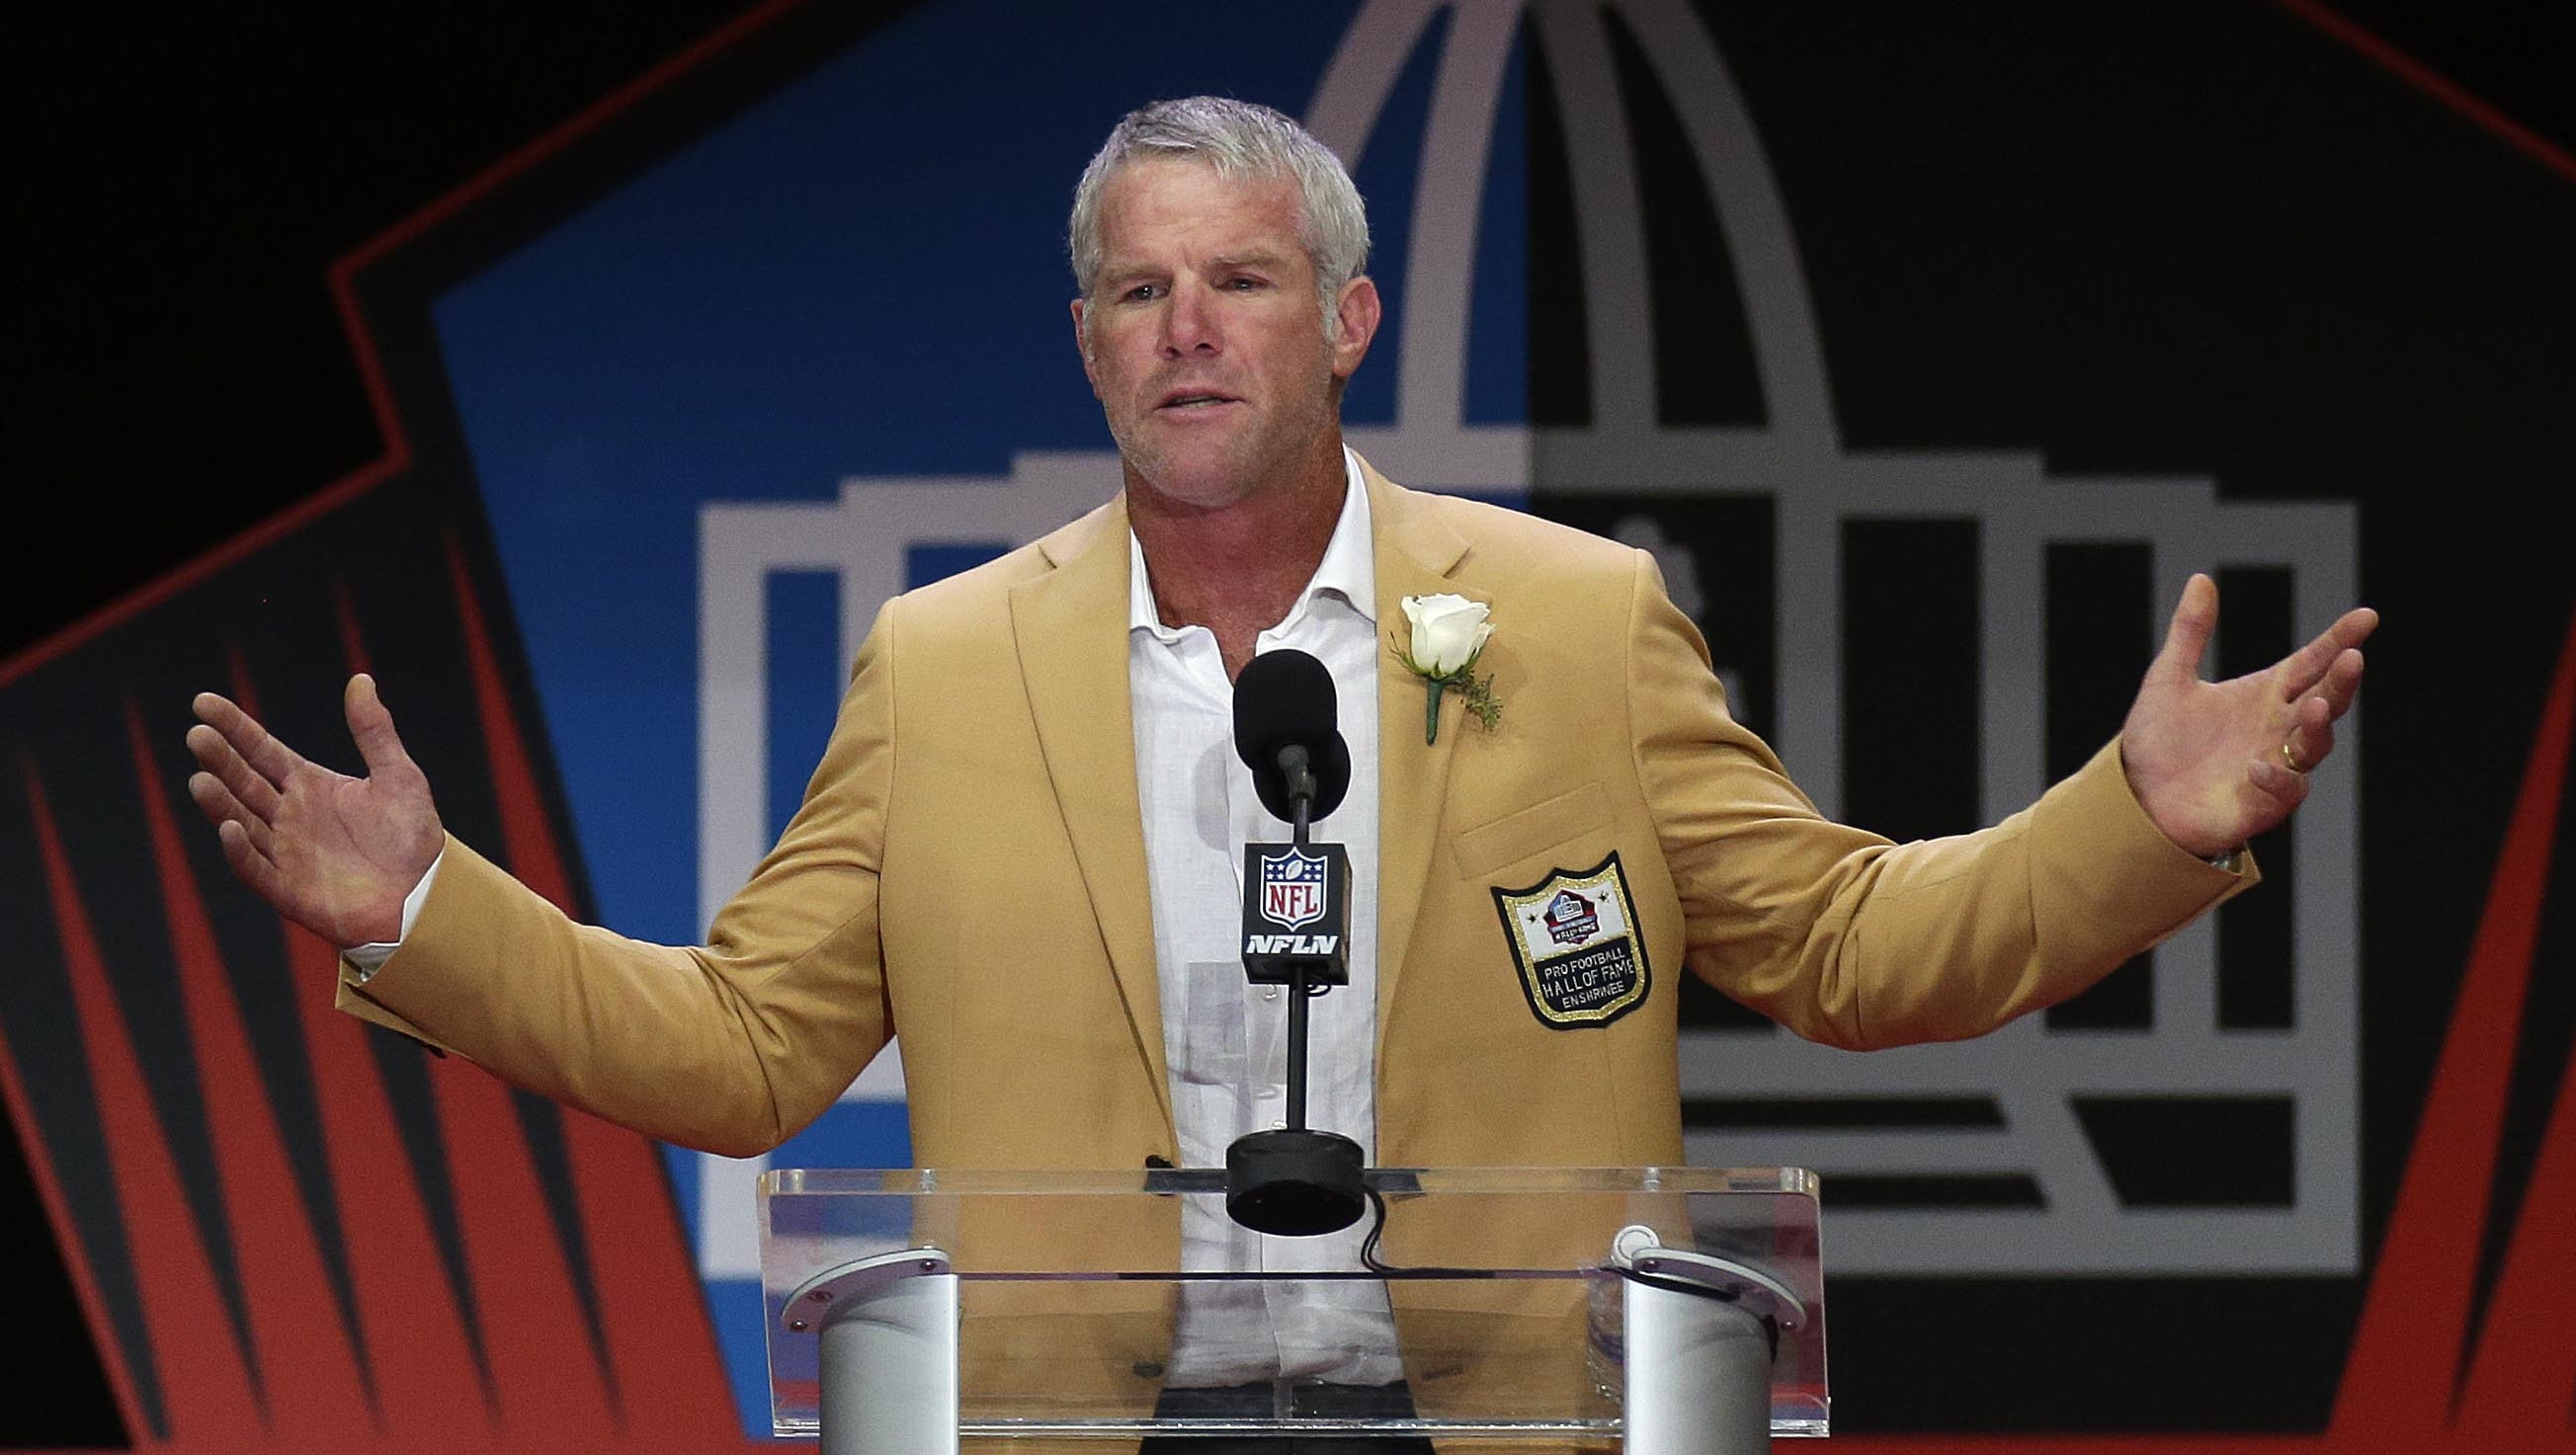 Former Green Bay Packers quarterback Brett talks about his teammates, father, coaches and fans that have influenced his life  during NFL Pro Football Hall of Fame Enshrinement Ceremony in Tom Benson Stadium in Canton, Ohio, Saturday, August 6, 2016.